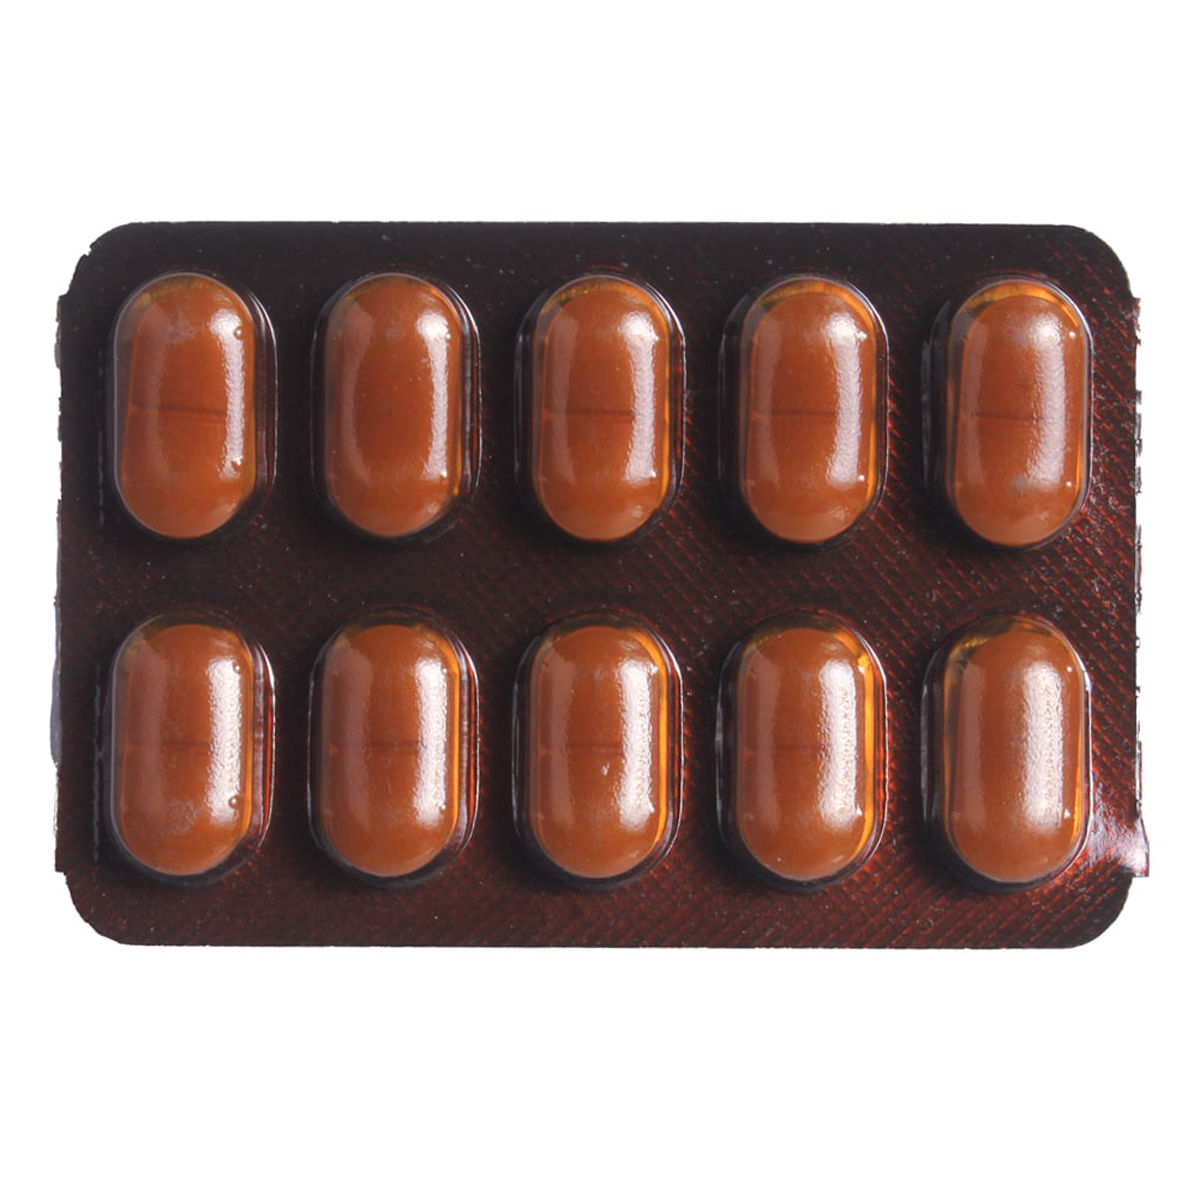 Dolowin Forte Tablet 10's, Pack of 10 TABLETS